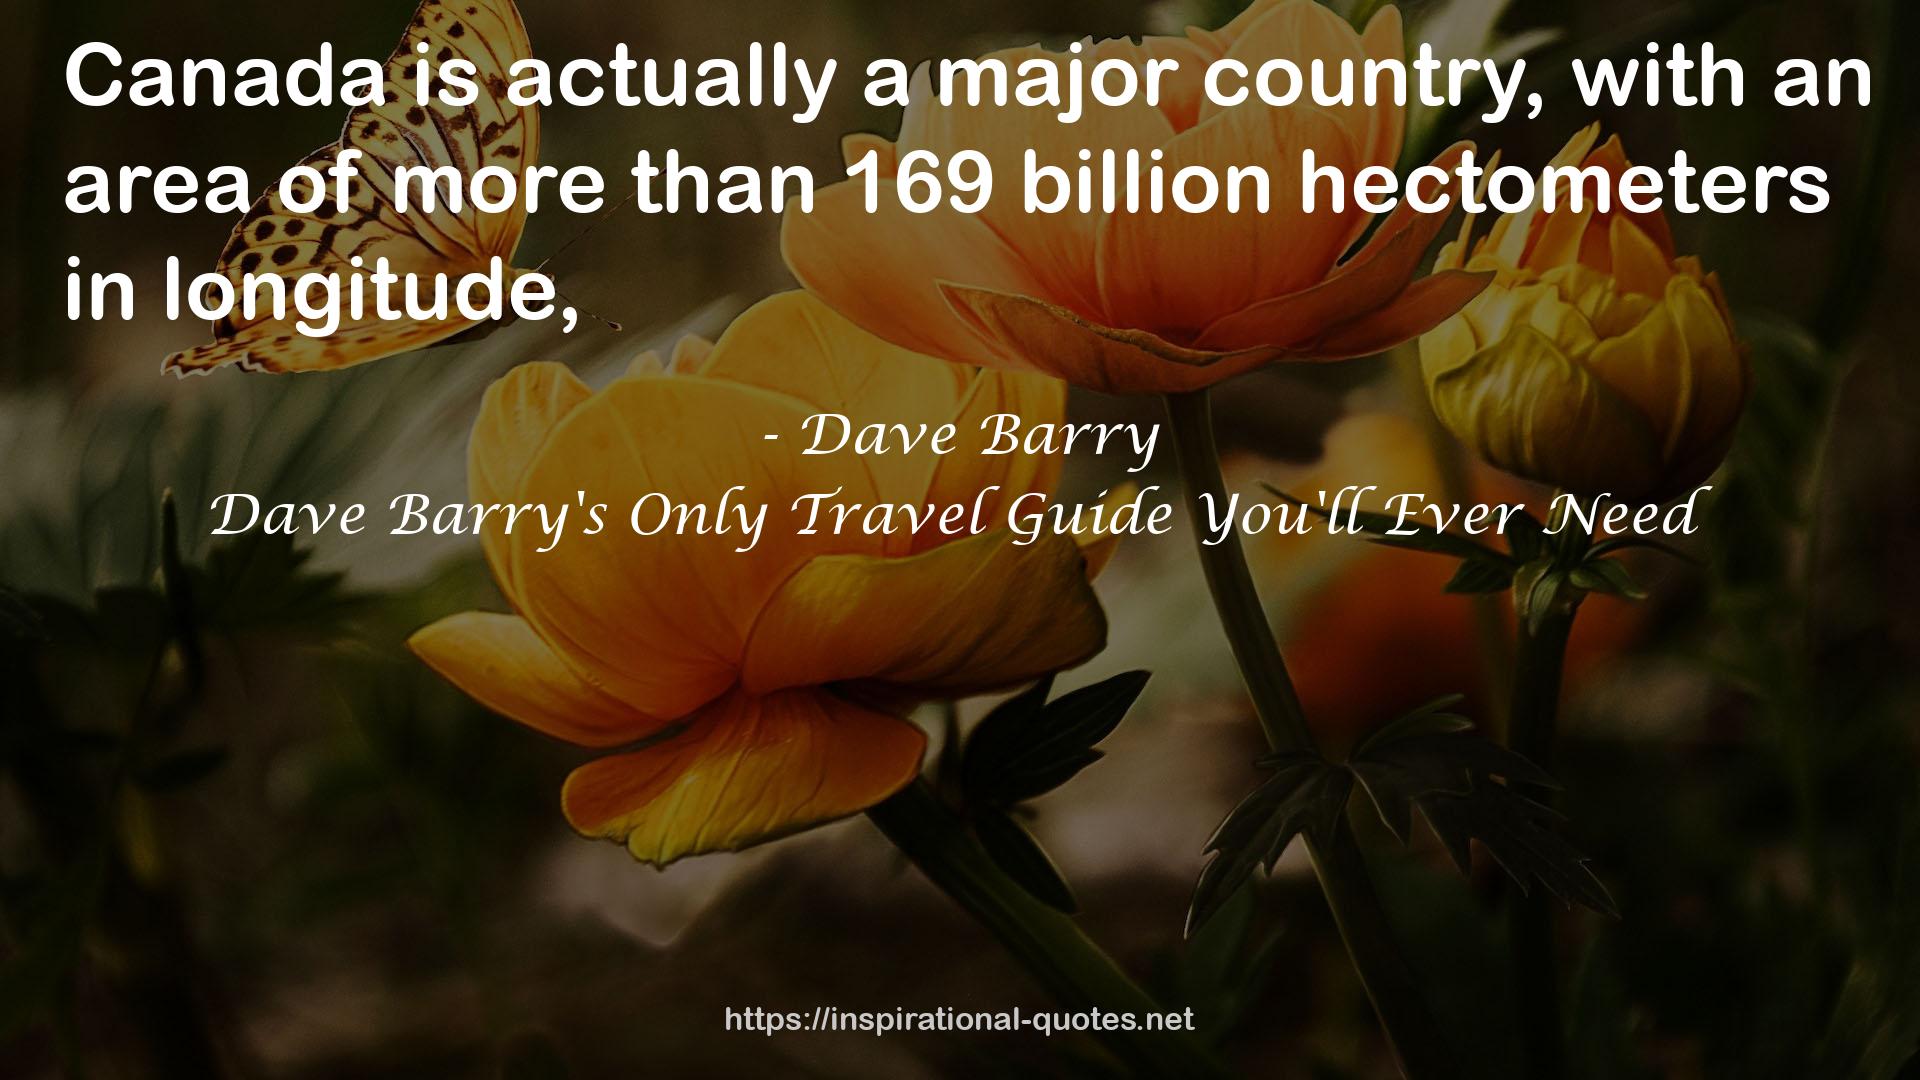 Dave Barry's Only Travel Guide You'll Ever Need QUOTES